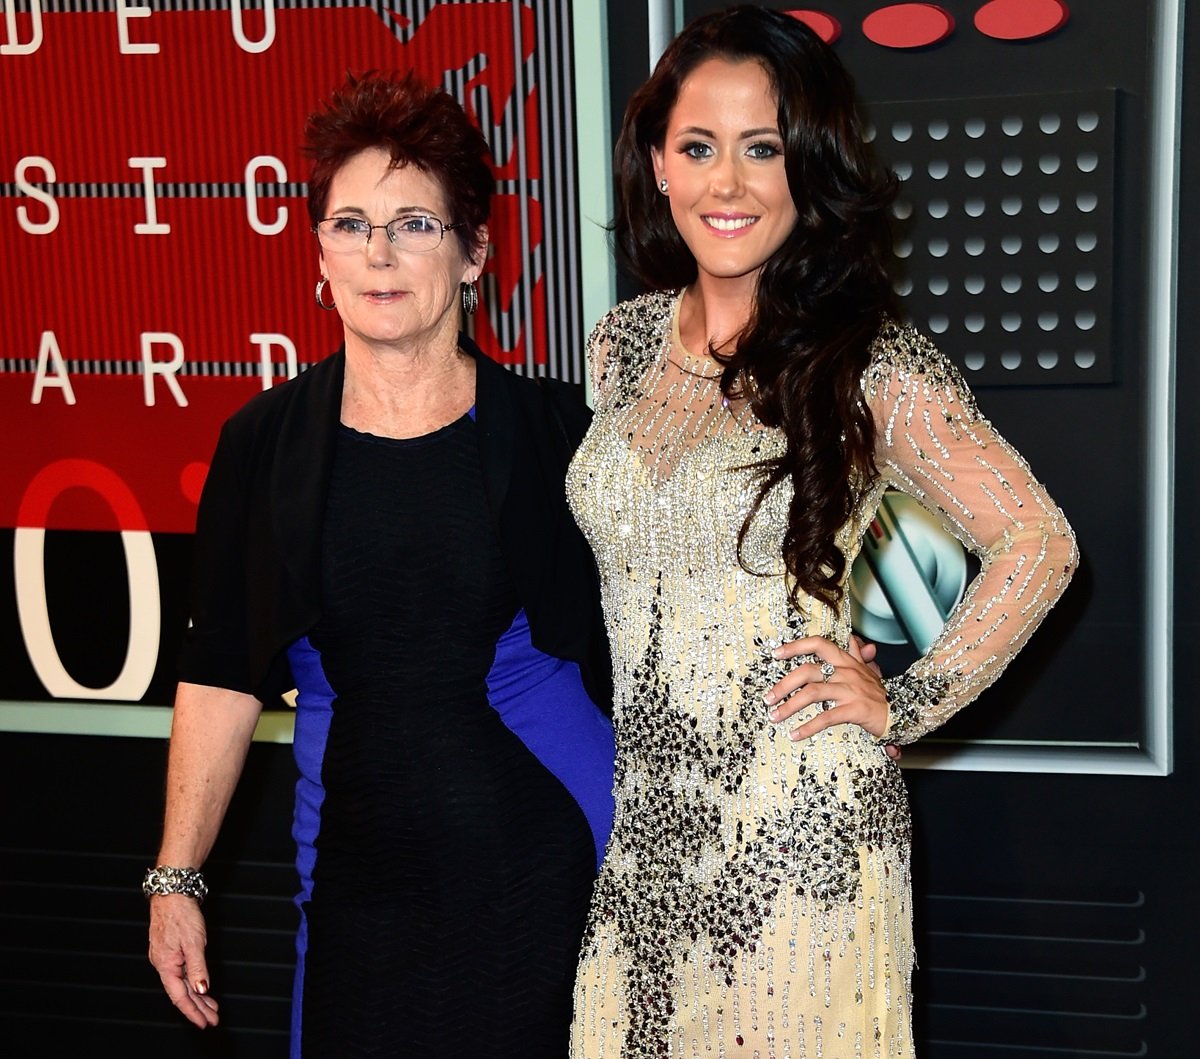 Barbara Evans and Jenelle Evans attend the 2015 MTV Video Music Awards at Microsoft Theater on August 30, 2015 in Los Angeles, California.